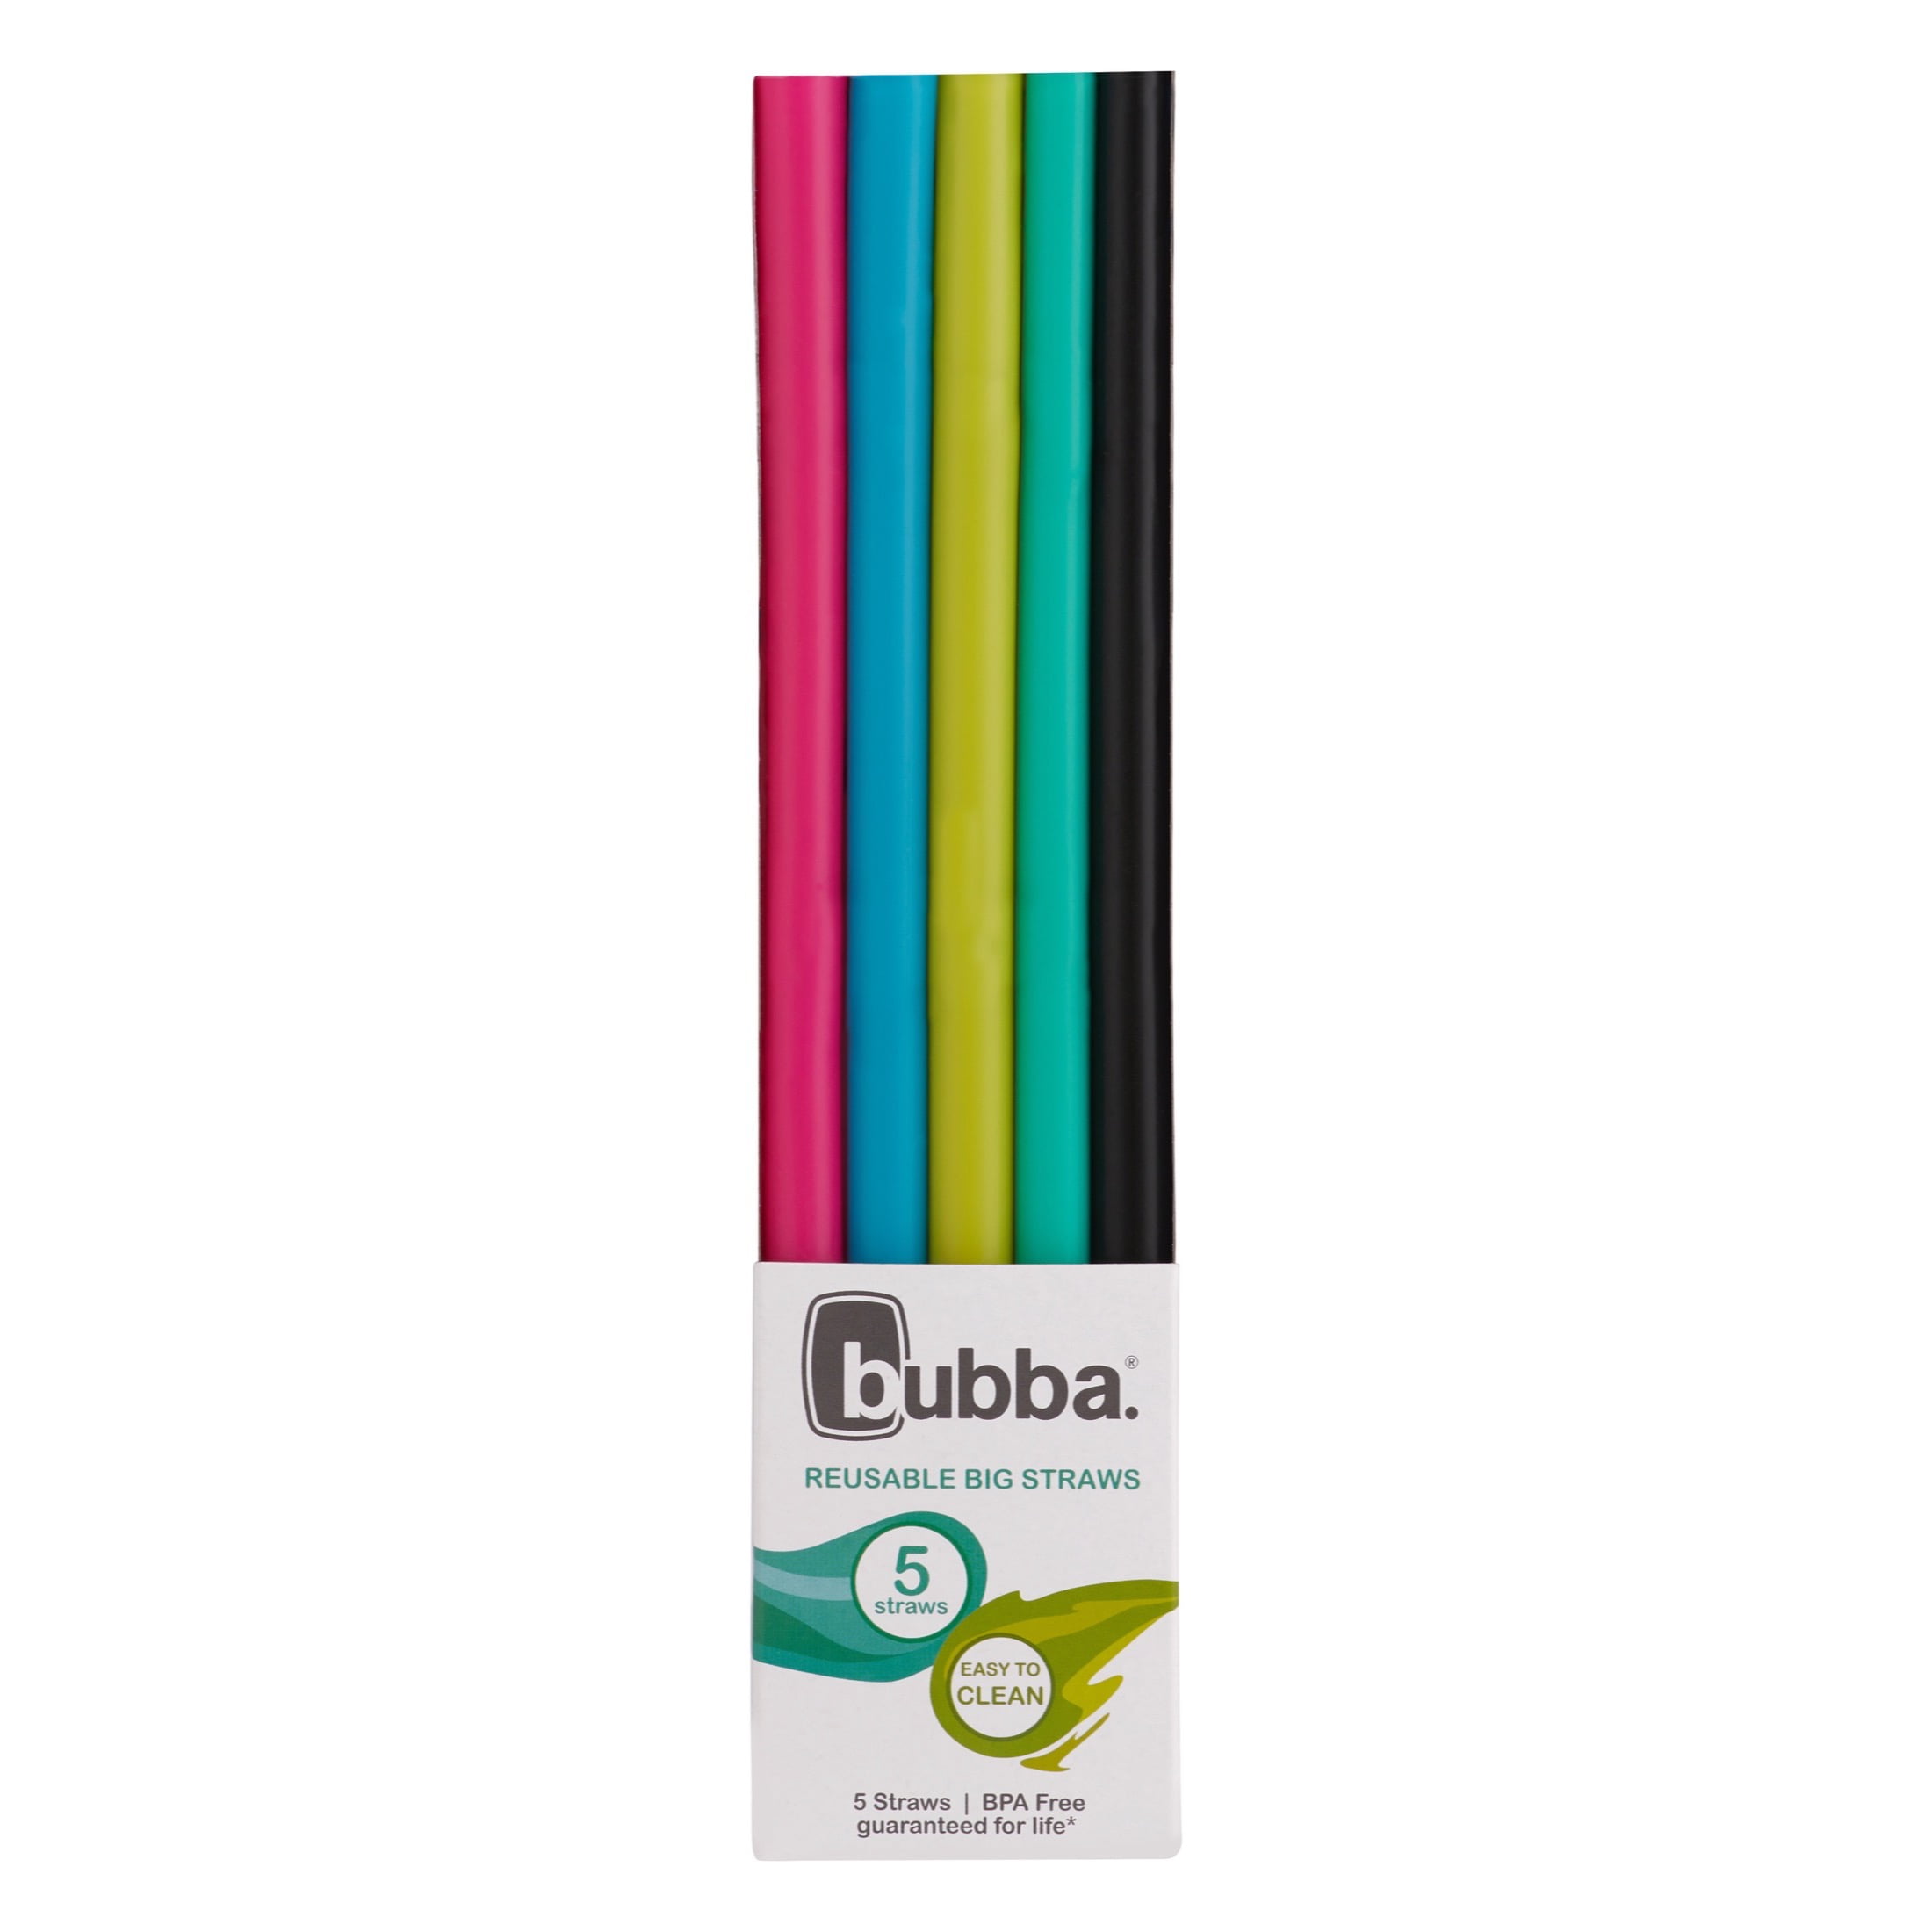 Bubba Reusable Silicone Big Straws, Pack of 5